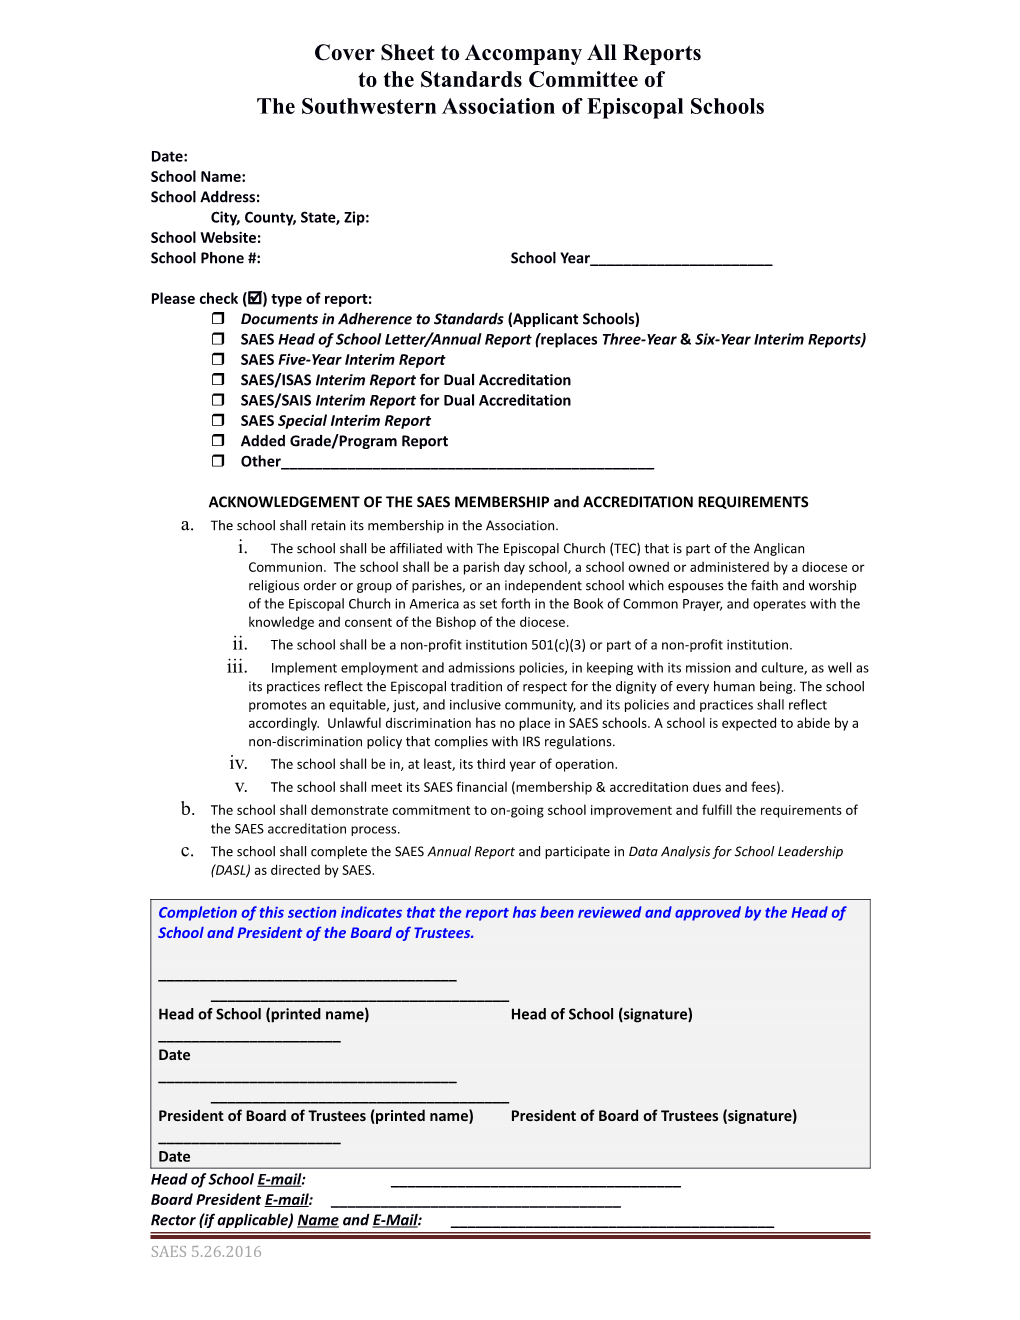 Cover Sheet to Accompany All Reports to the Standards Committee Of